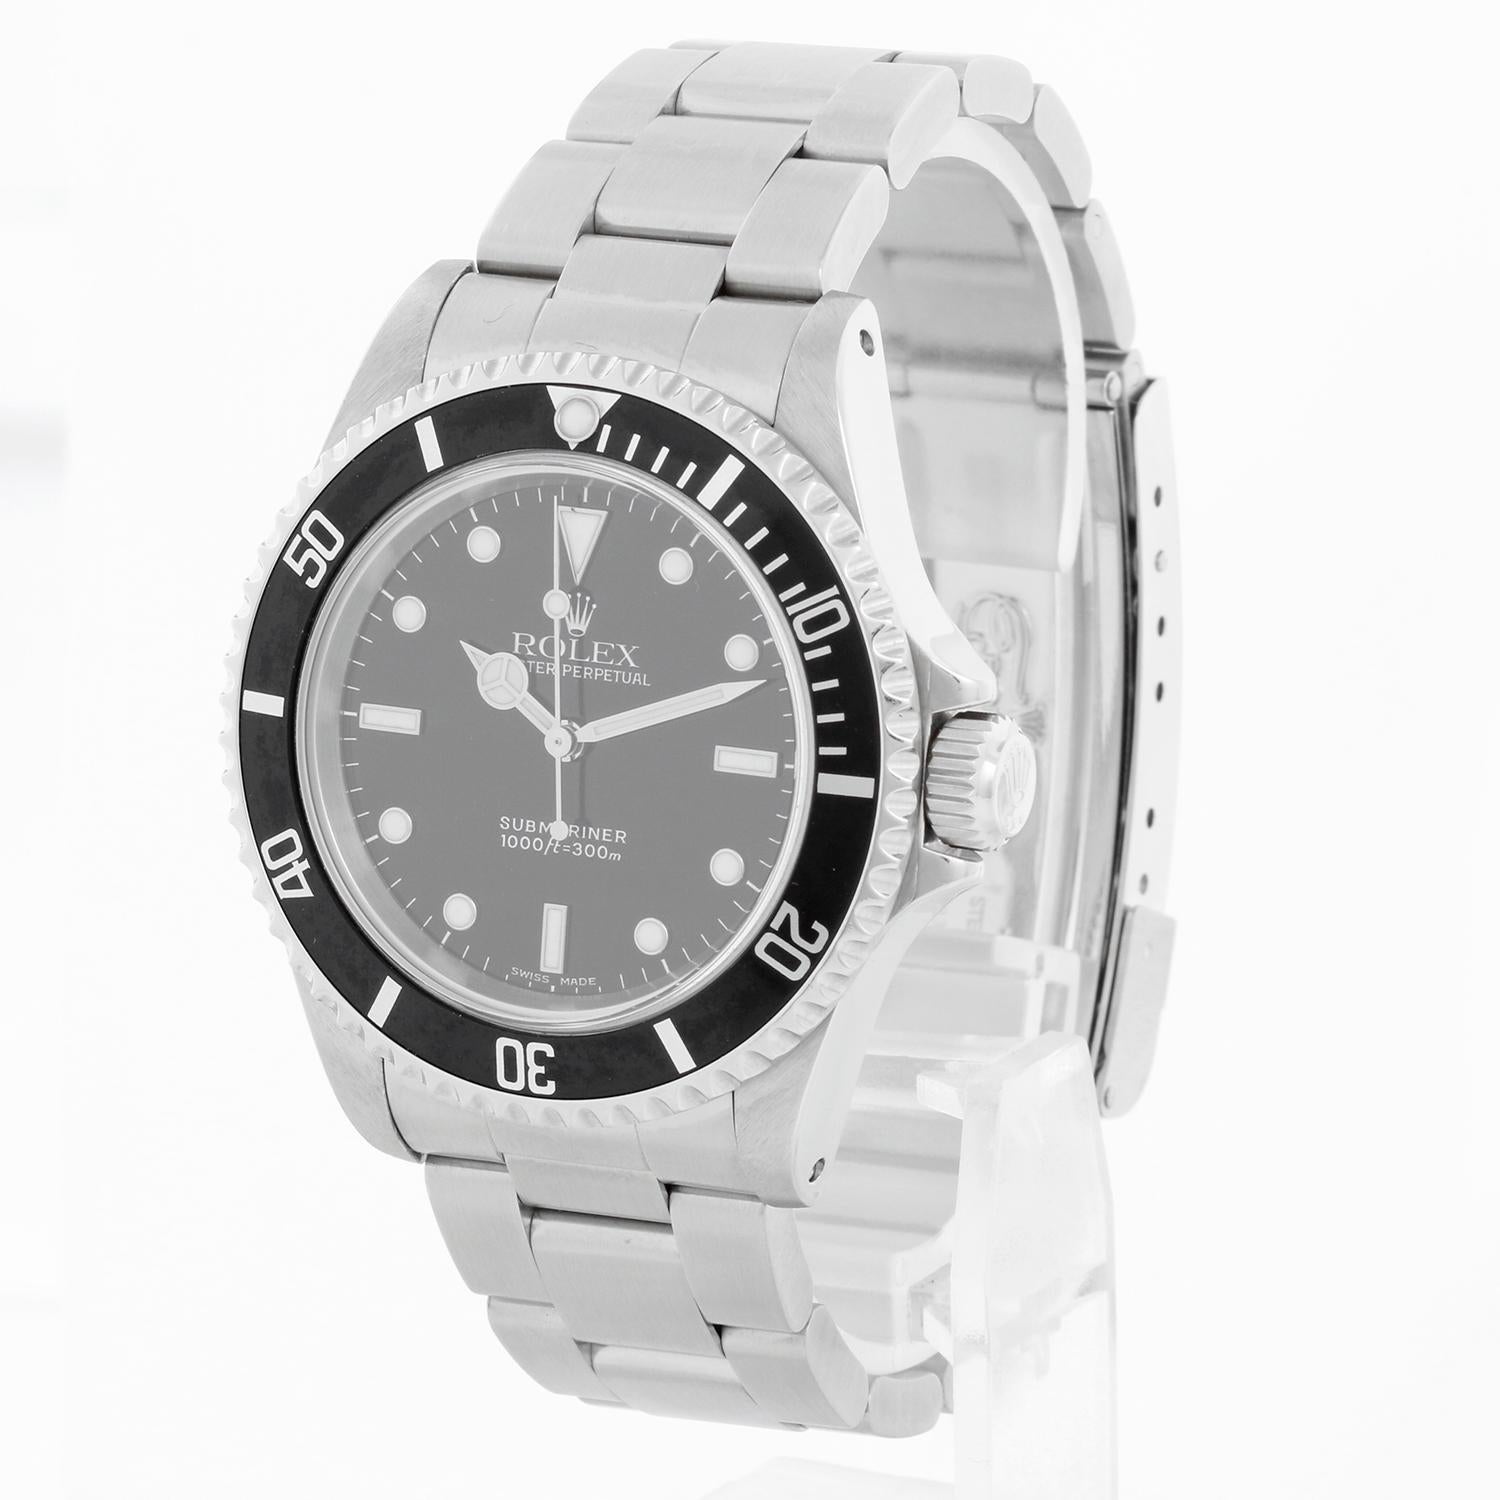 Rolex Submariner Men's  Stainless Steel Watch 14060M - Automatic winding, 31 jewels, Quickset, sapphire crystal. Stainless steel case (40mm diameter). Black dial with luminous hour markers. Stainless steel Oyster bracelet with flip-lock clasp.